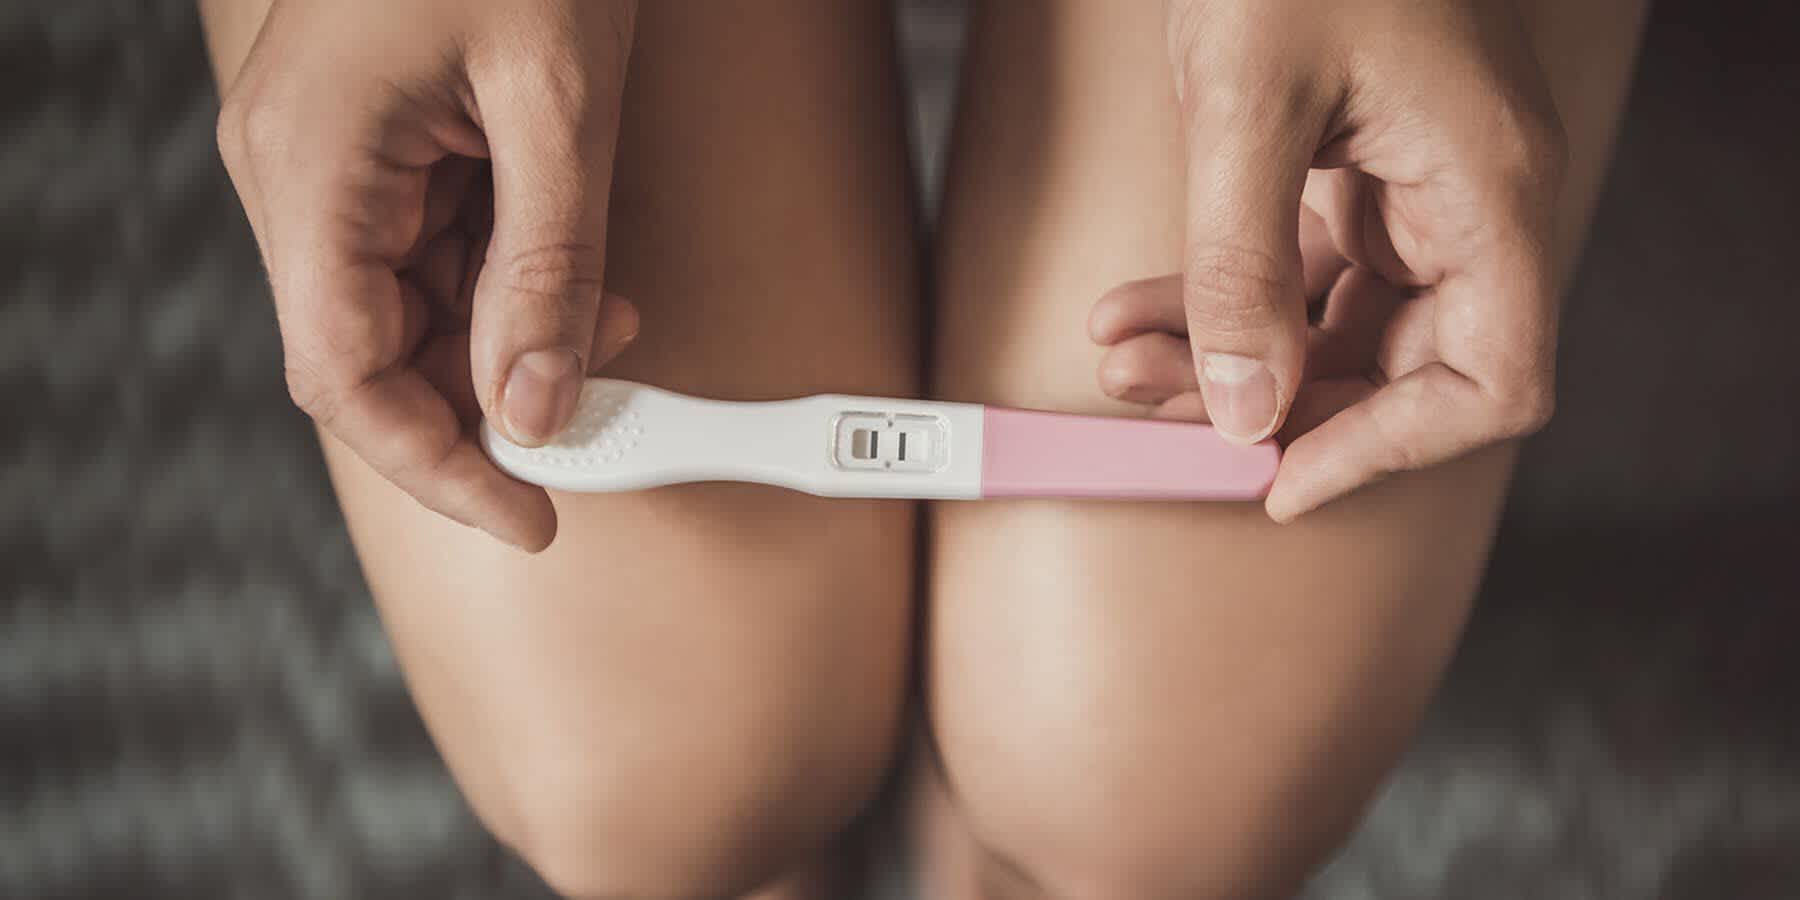 When Are You Most Fertile and Likely to Get Pregnant?